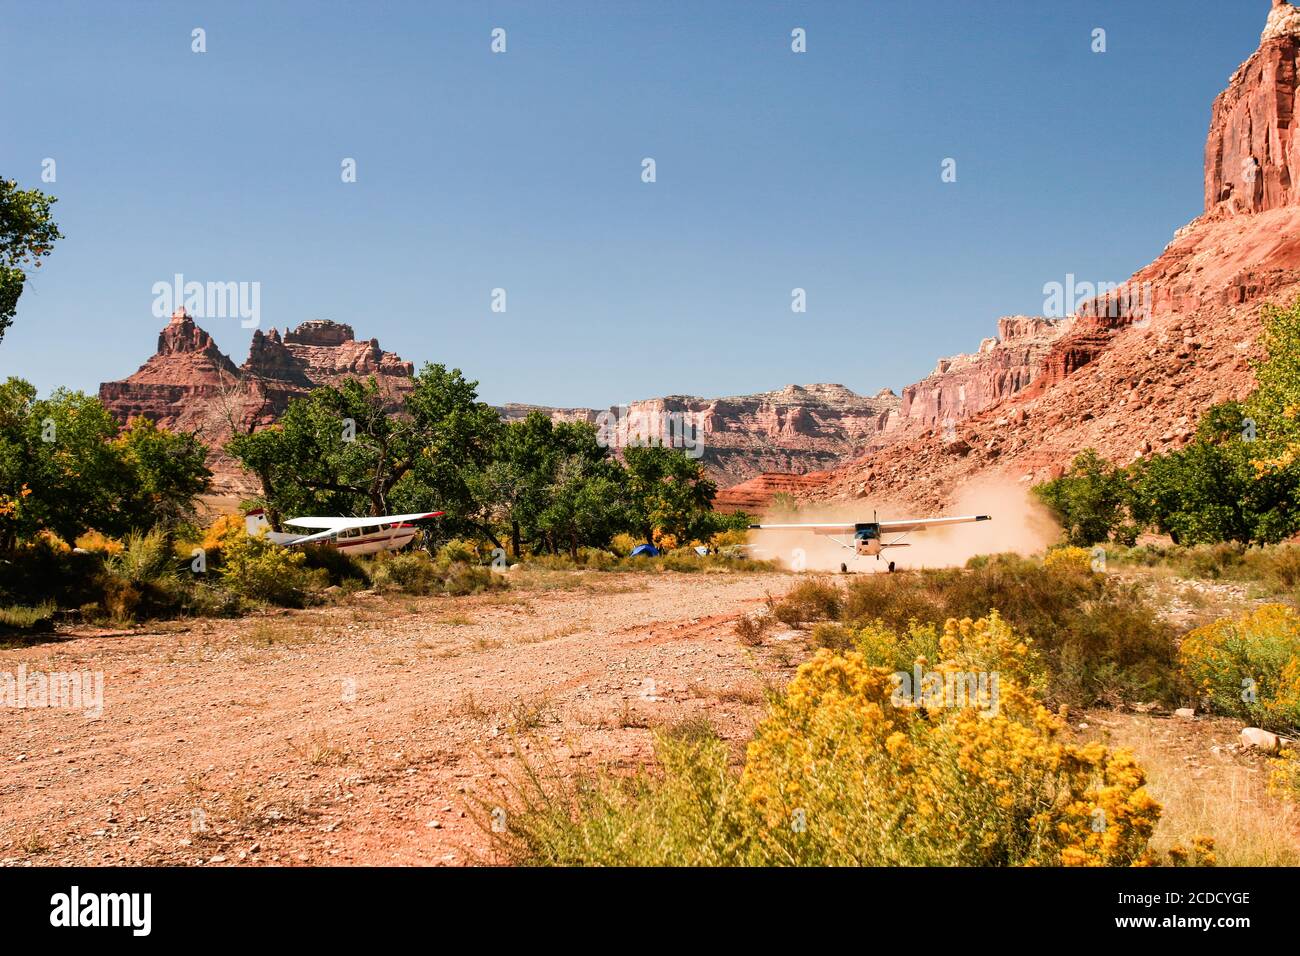 A Cessna 185 Skywagon of the Utah Backcountry Pilots Association takes off from the remote Mexican Mountain airstrip on the San Rafael Swell in Utah. Stock Photo